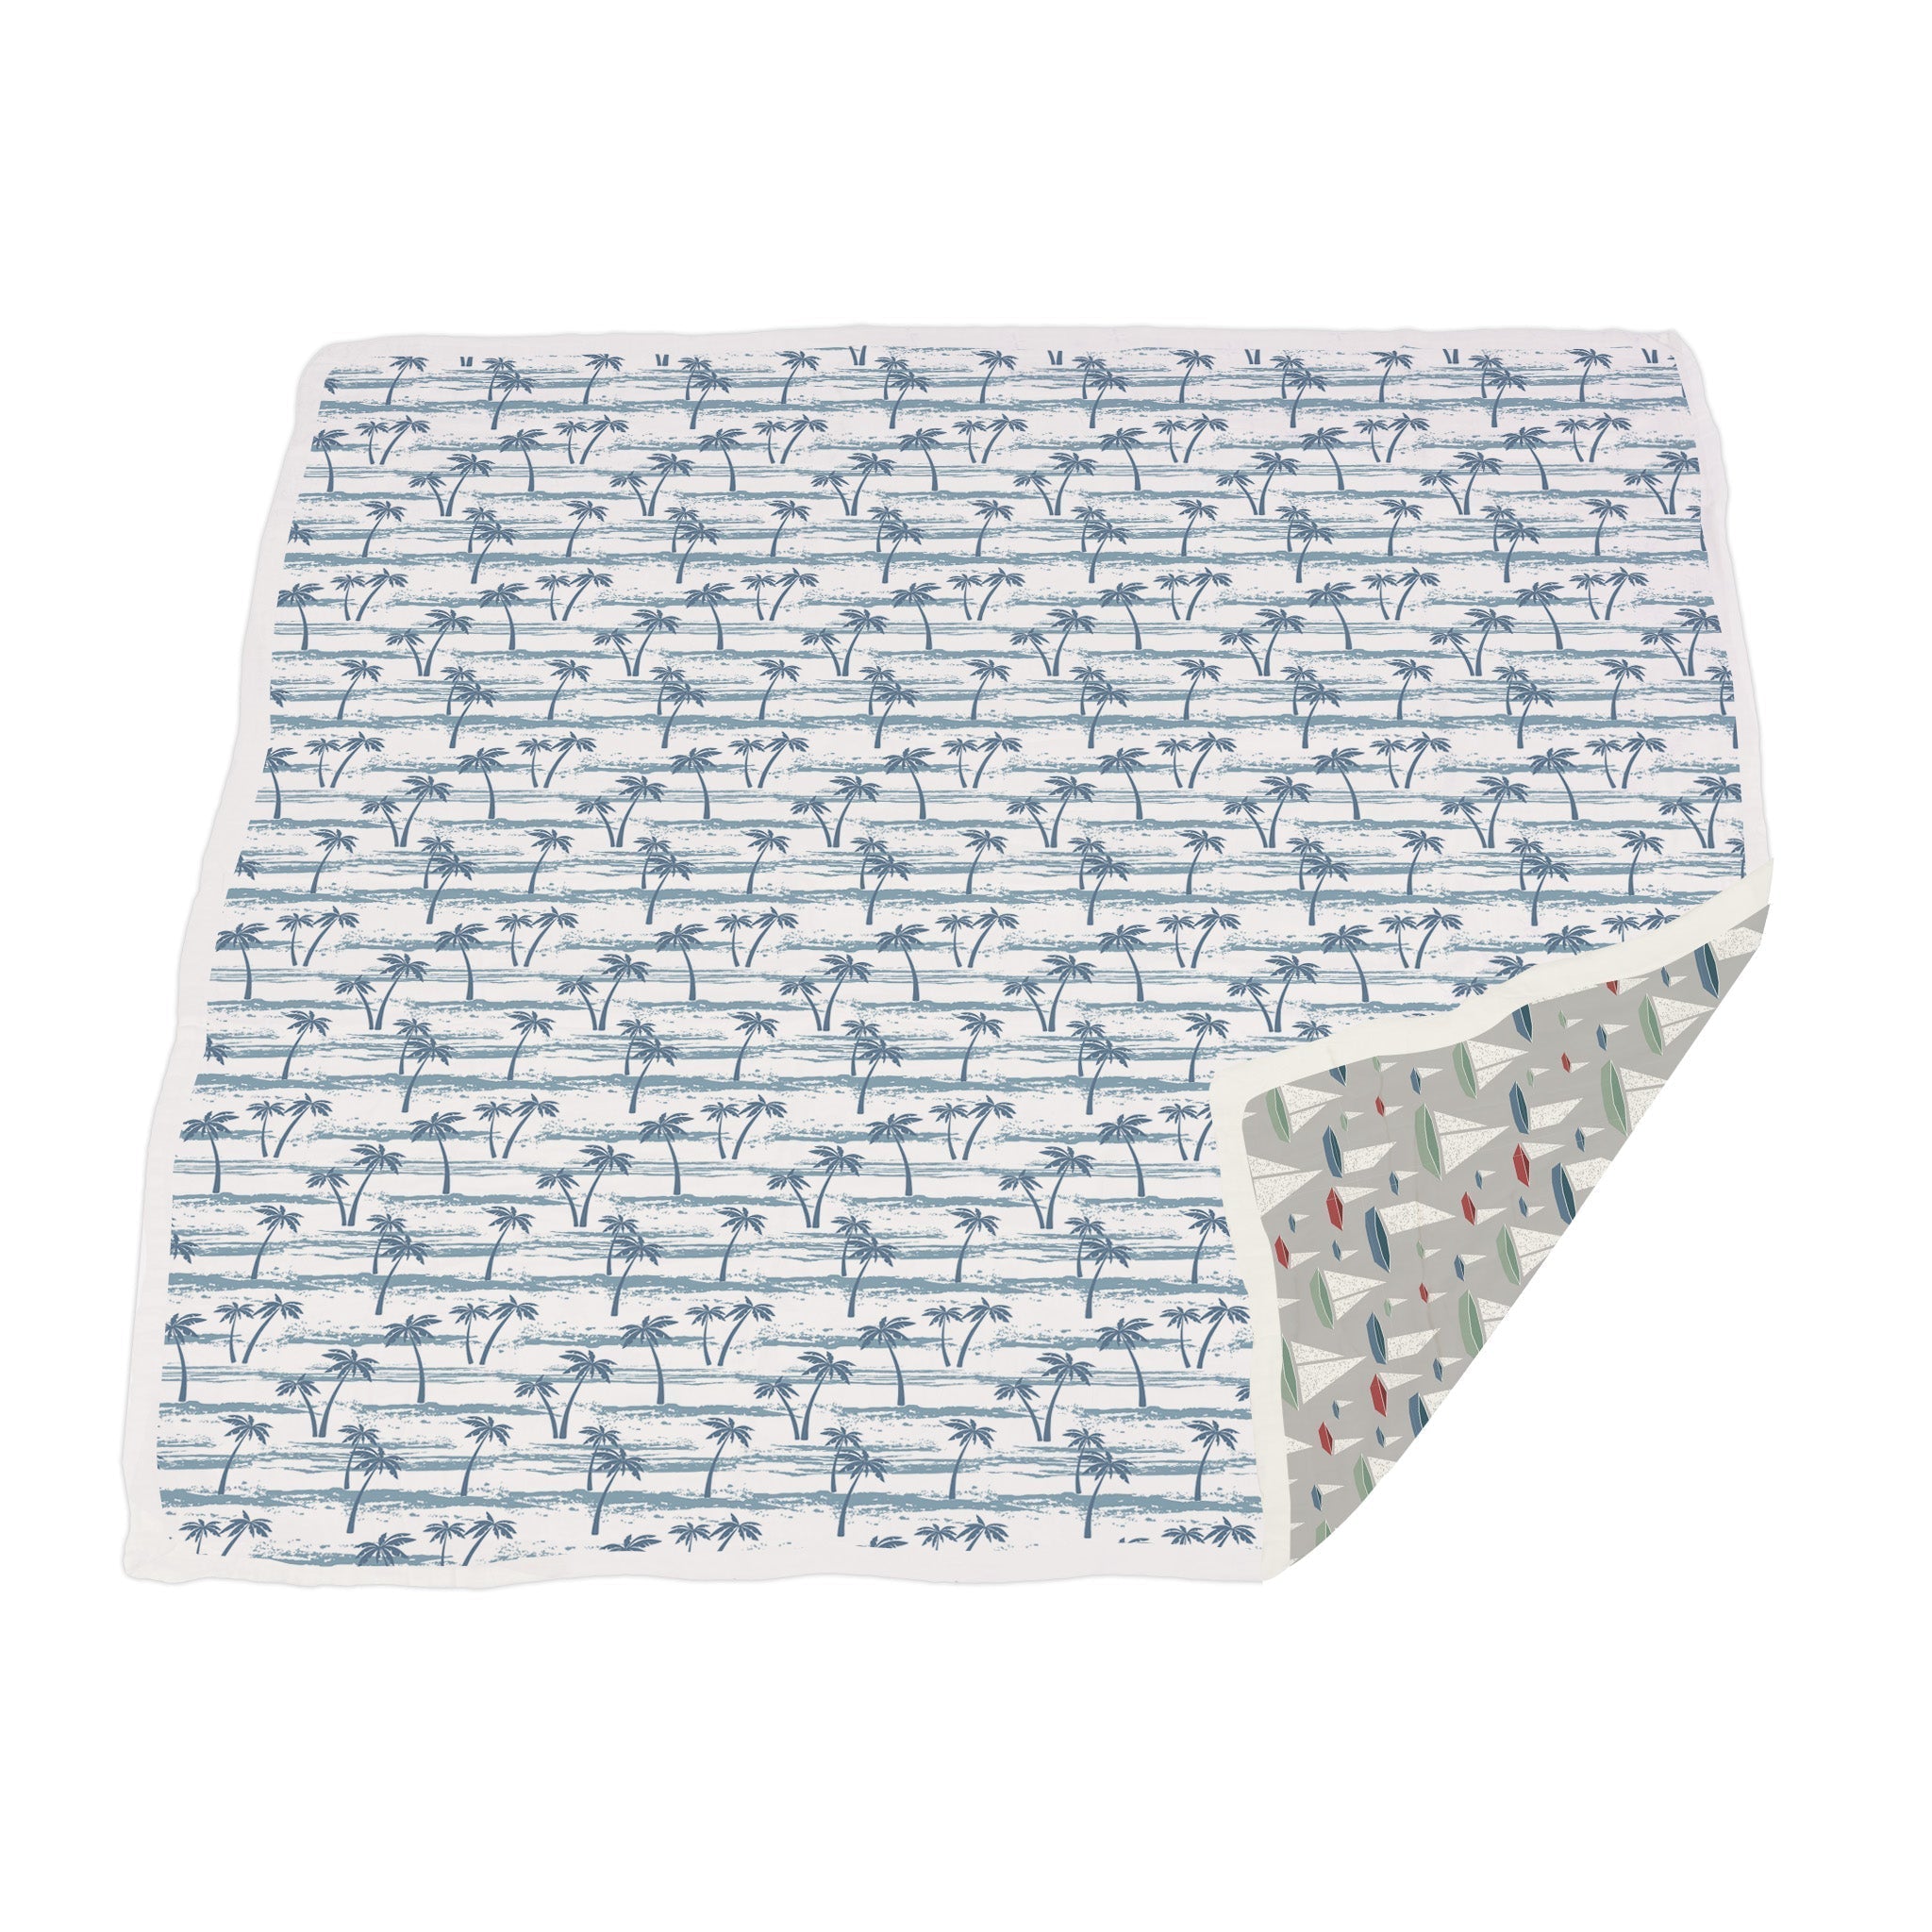 Reversible blanket with palm trees and sail boats